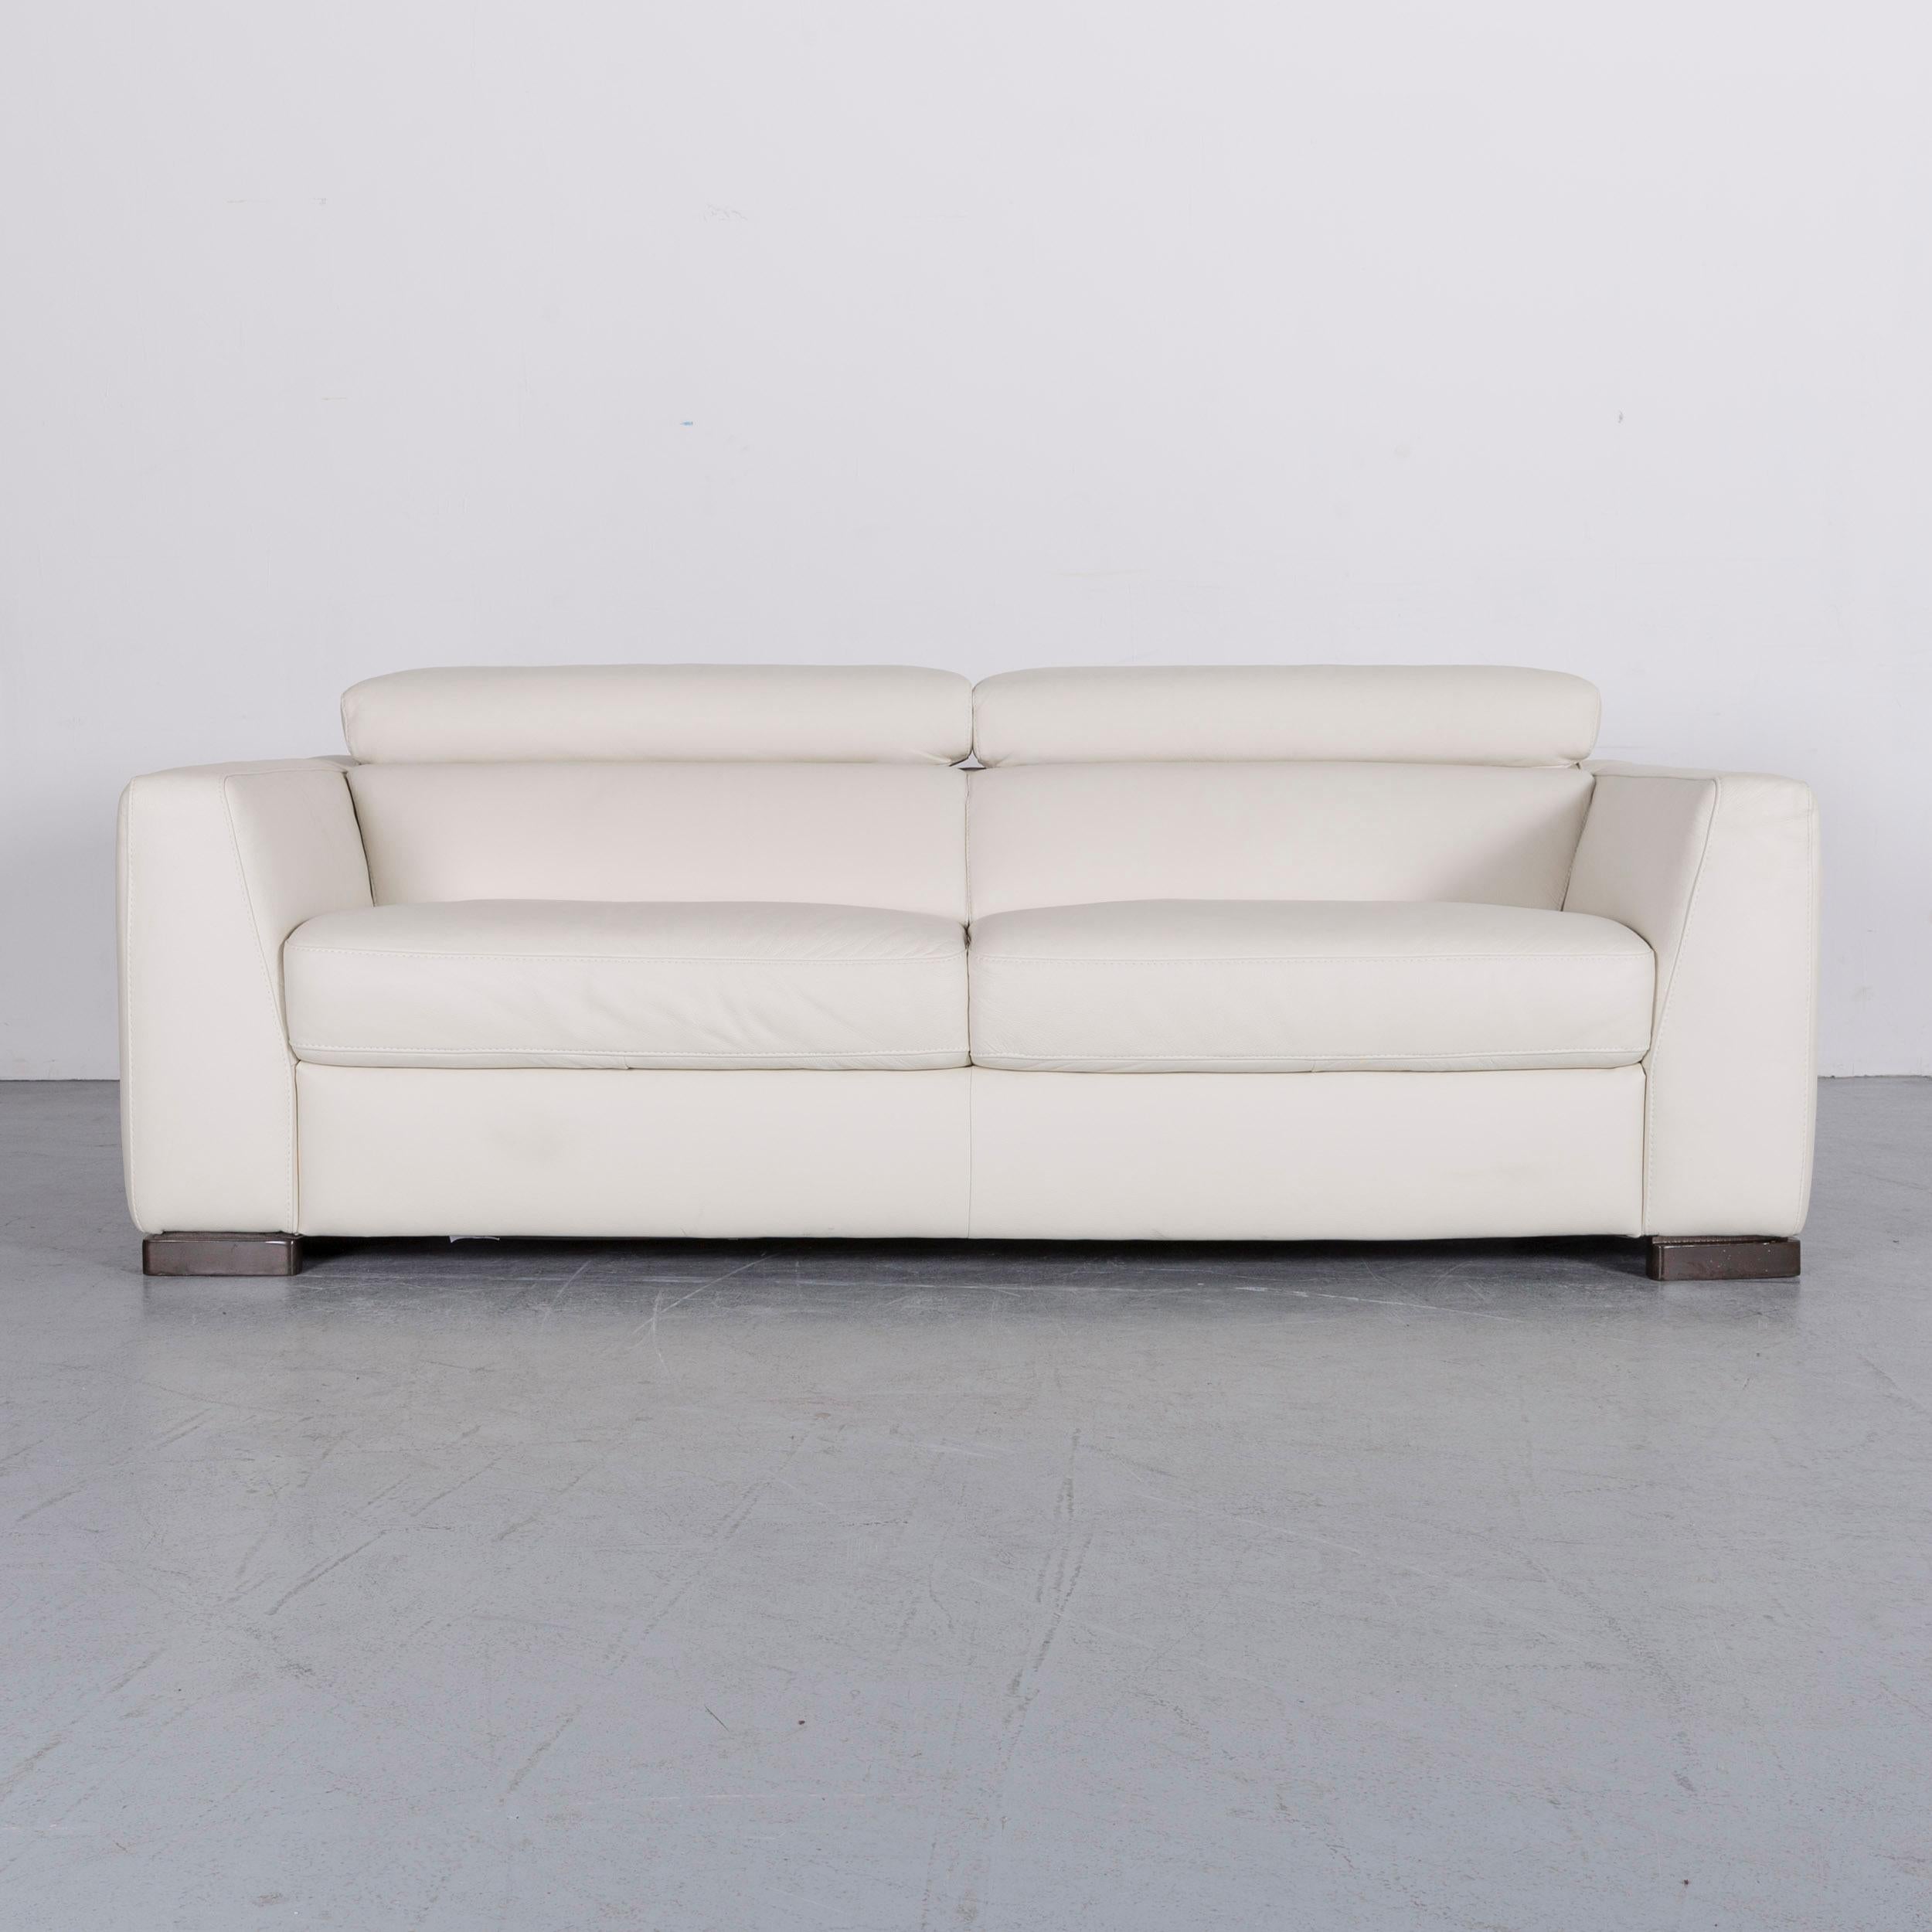 We bring to you an Italsofa designer leather sofa crème white modern three-seat couch.